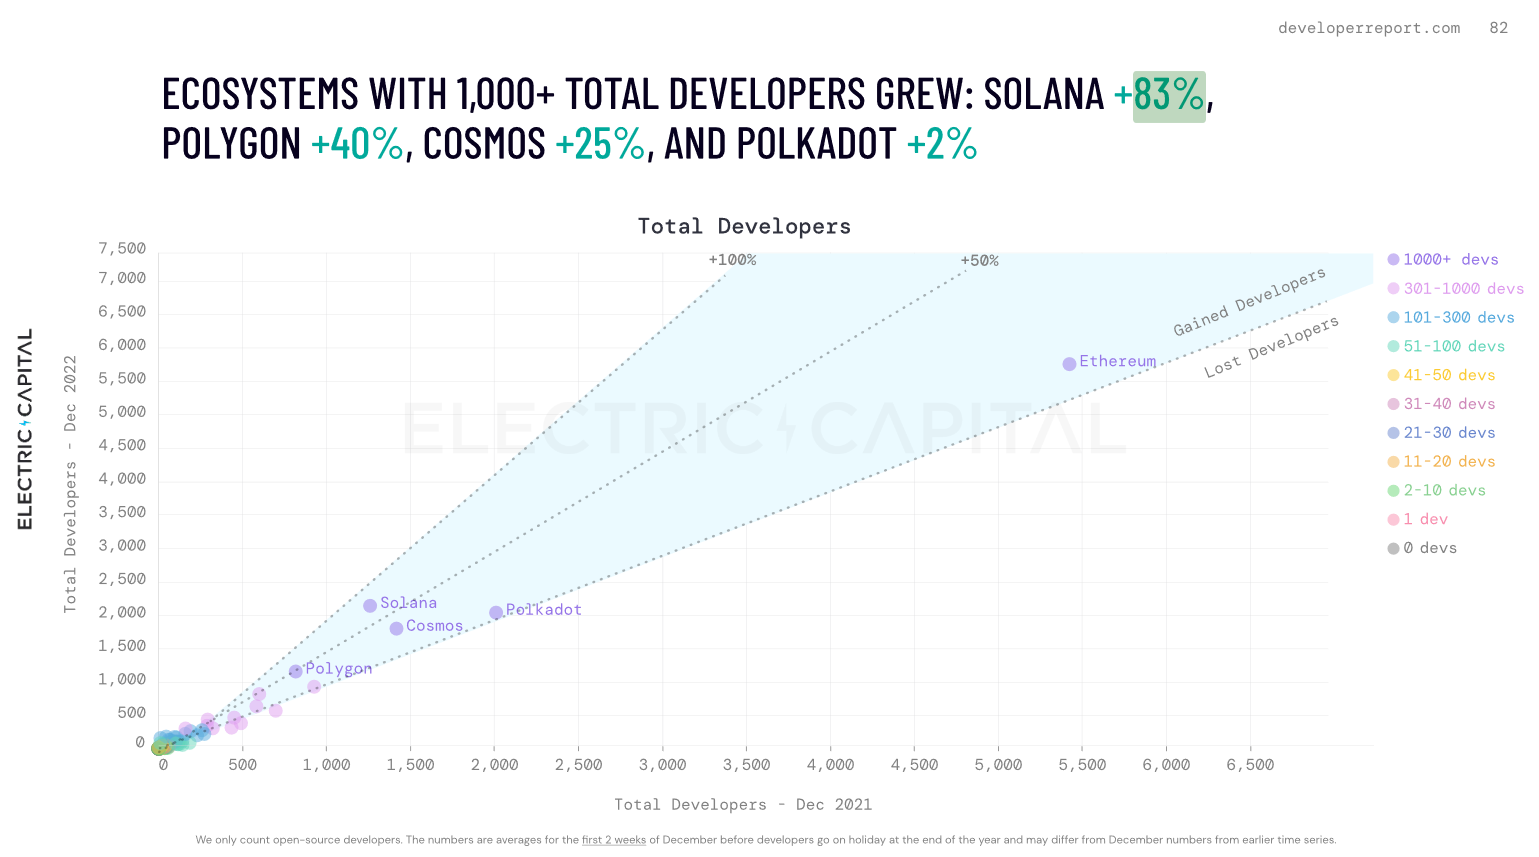 A graph showing developer growth on blockchains such as Solana, Polygon, Cosmos, and Polygon in 2022